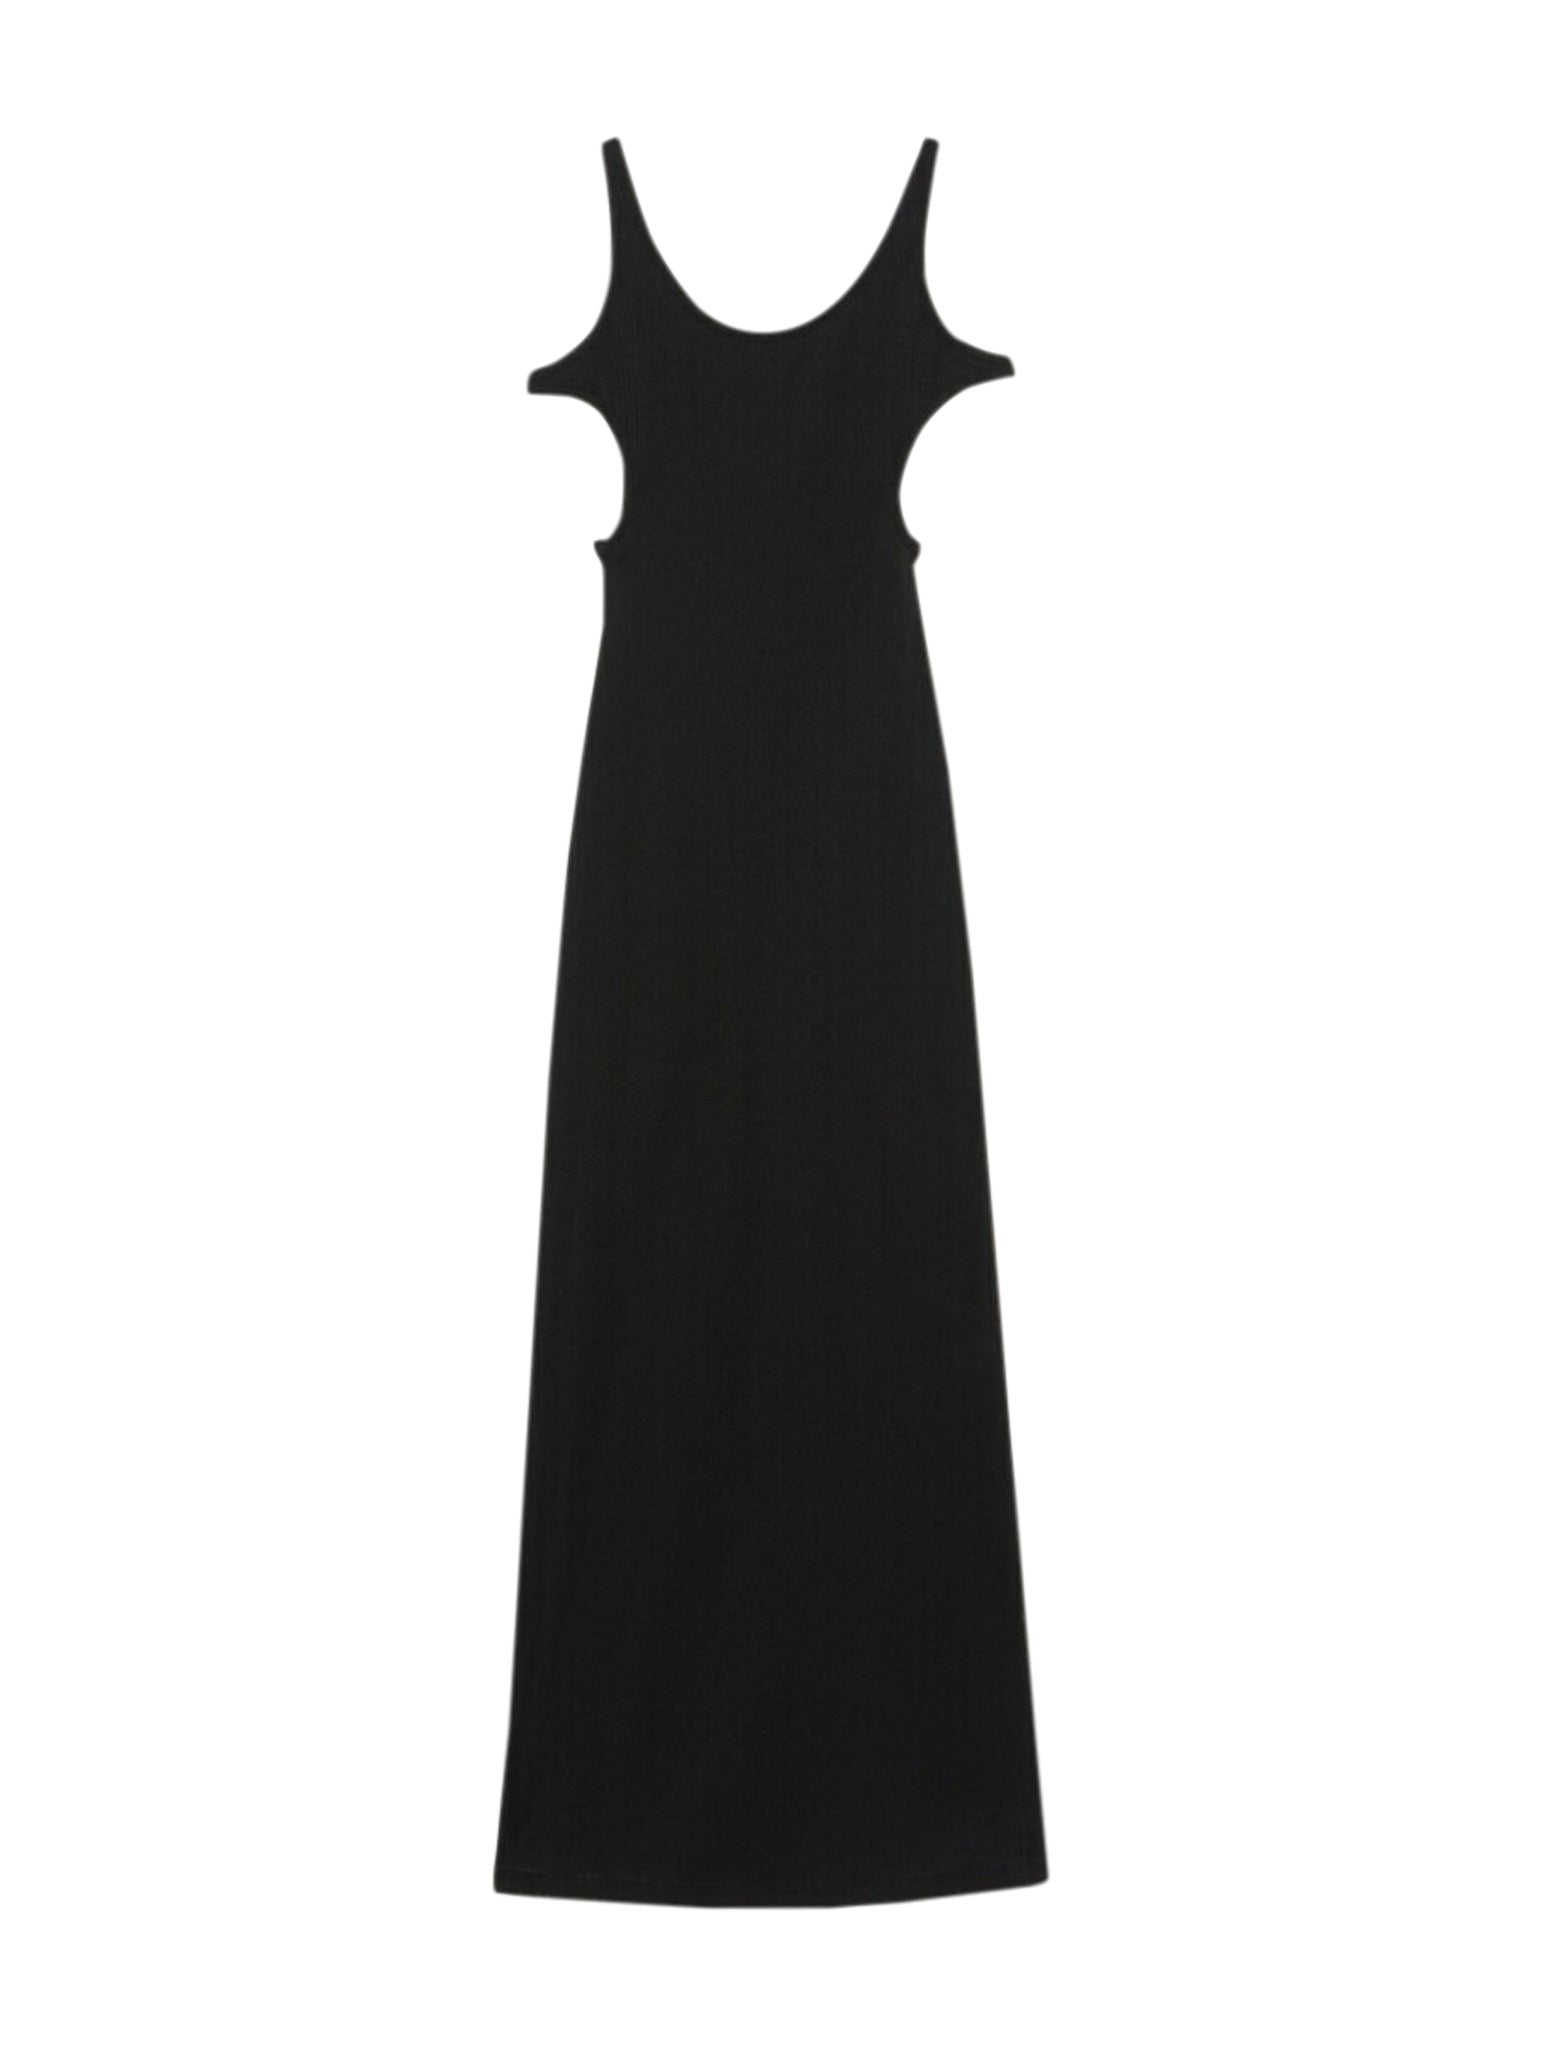 Ribbed jersey dress with cut-out detail